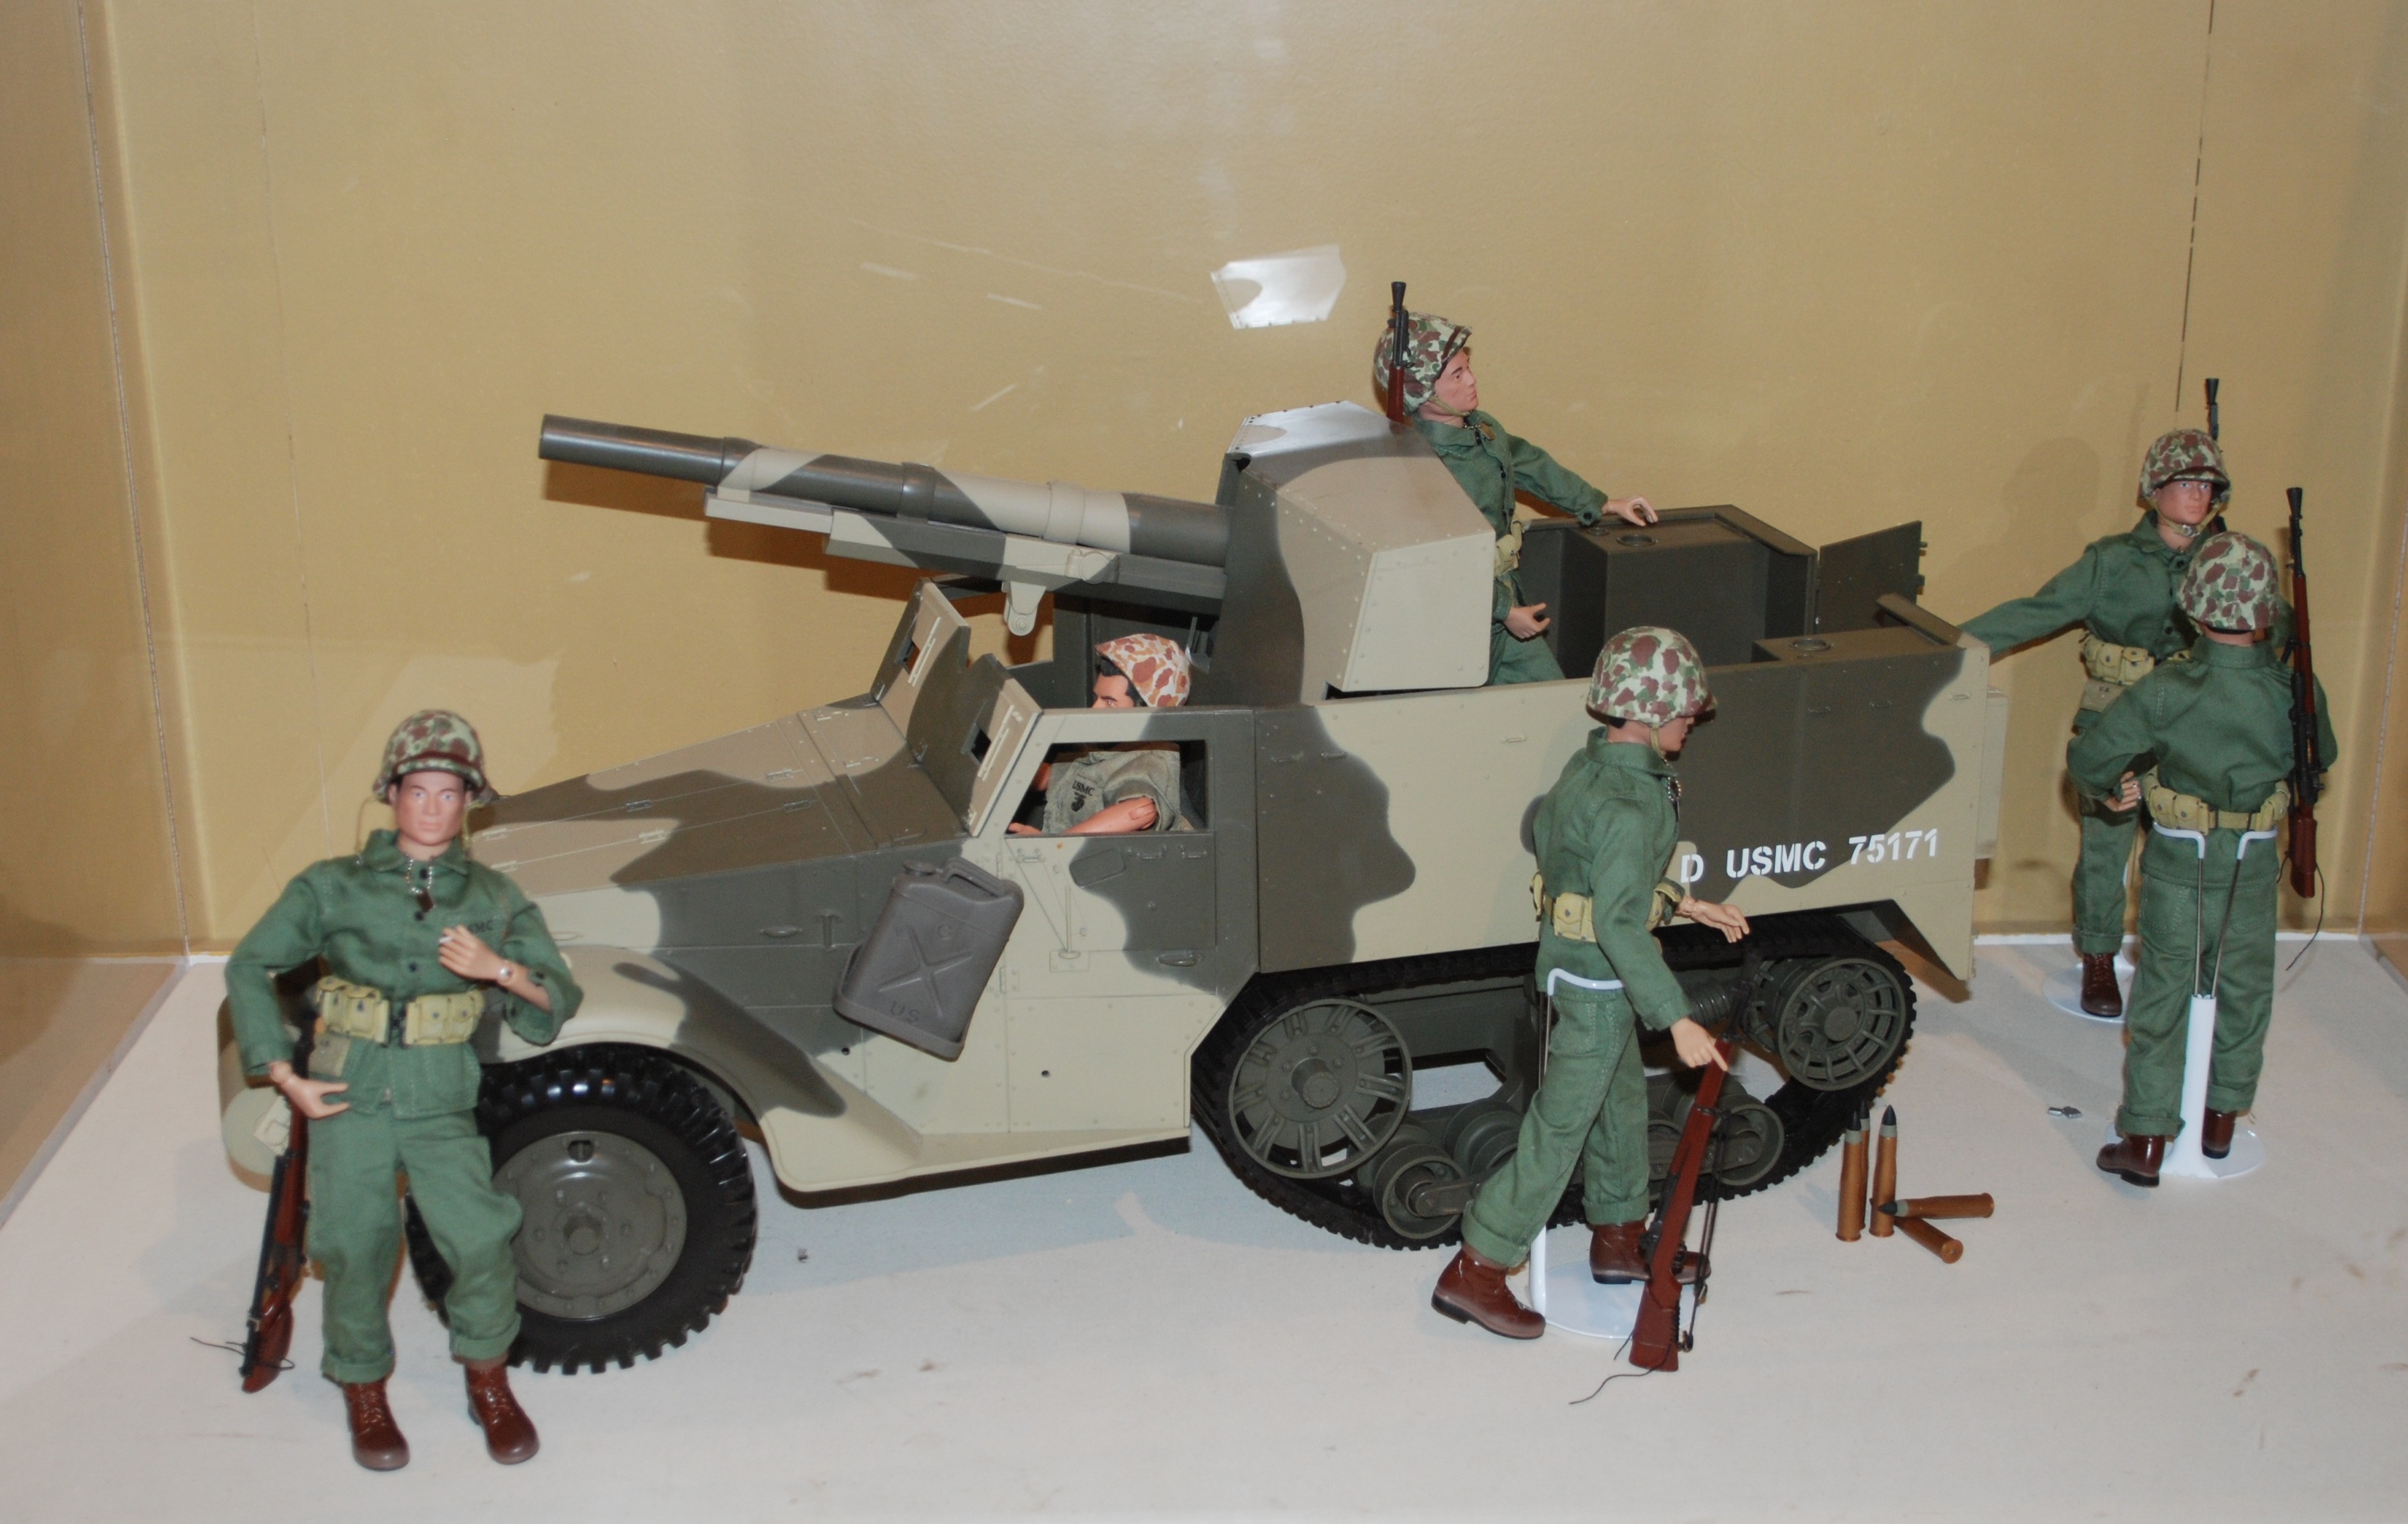 Children Tanks Turret Military Toy Plastic Soldiers 12 Poses Army Men Figures 